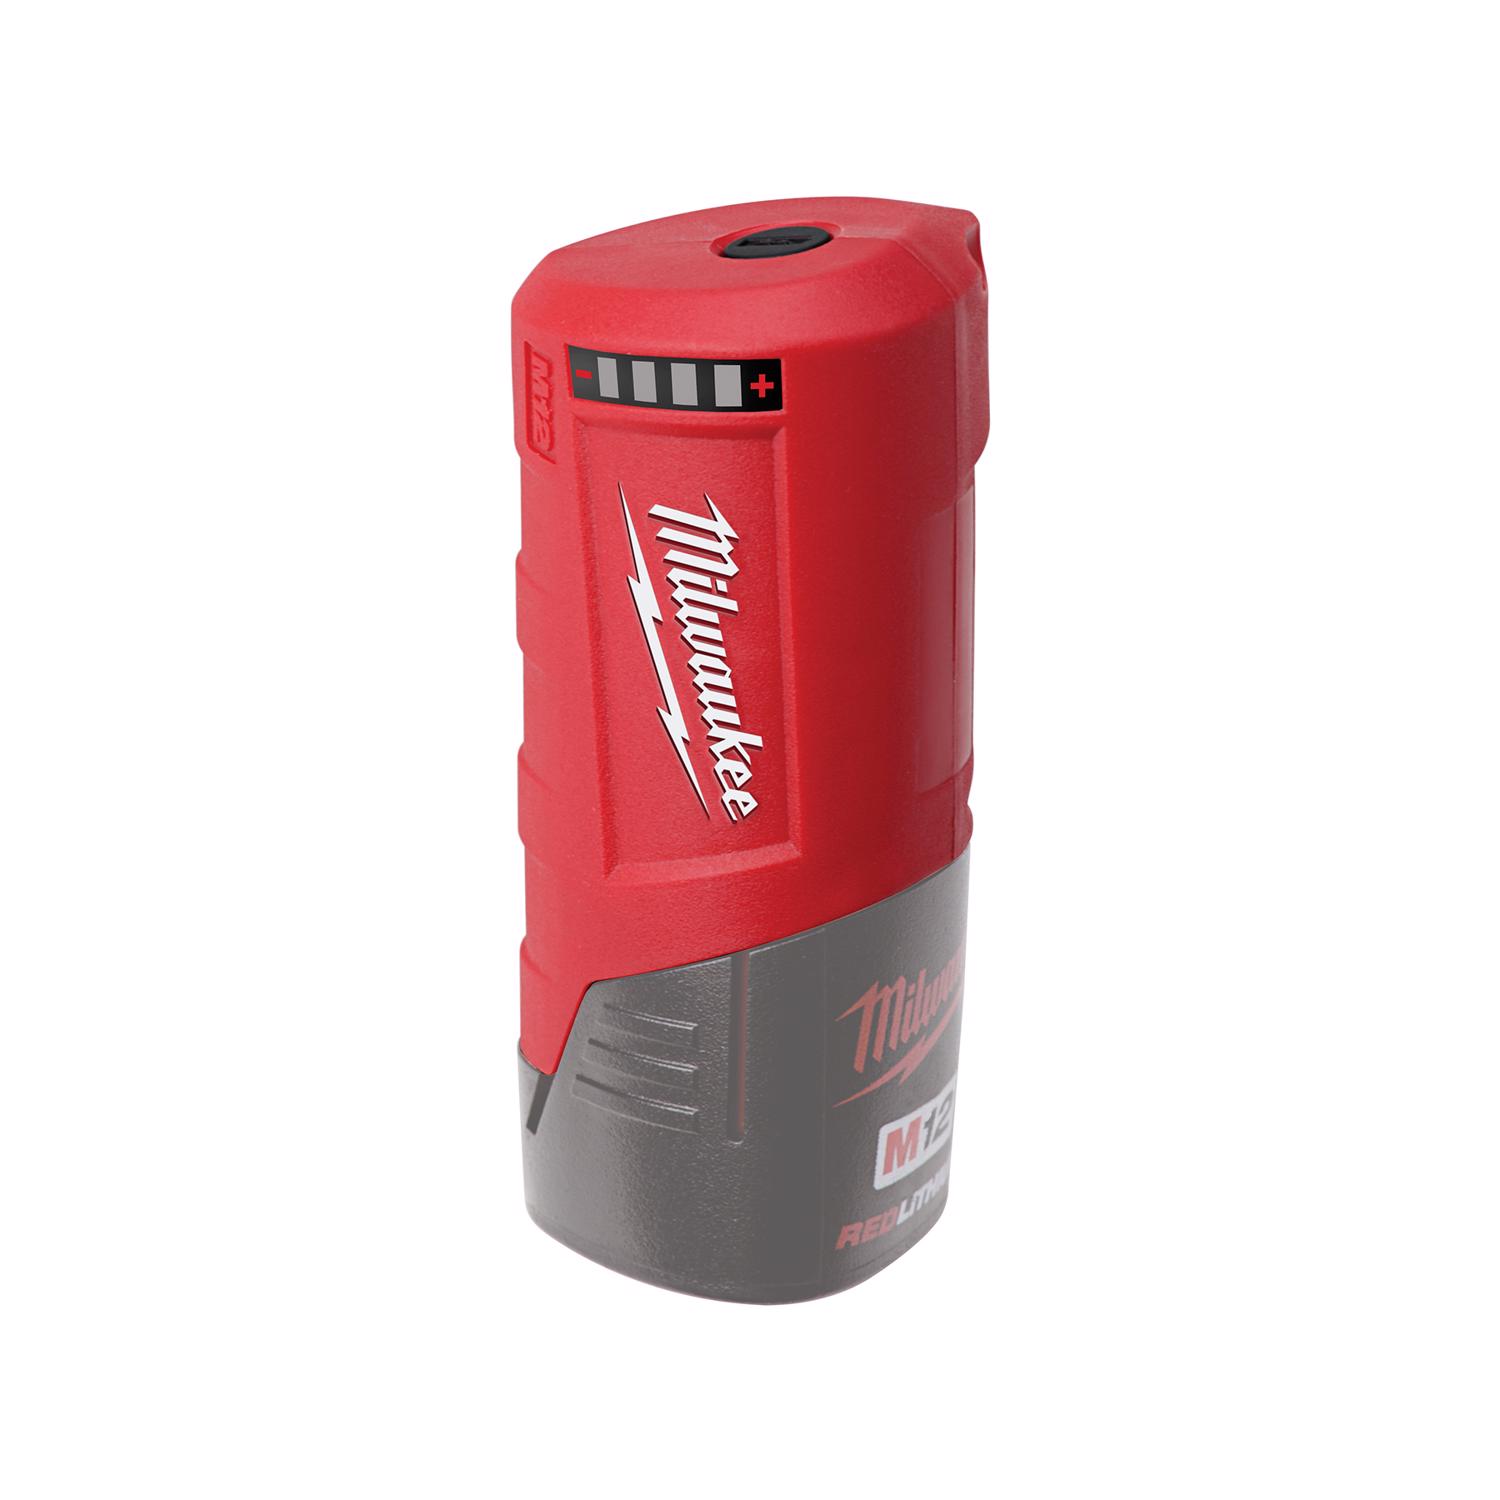 Photos - Battery Charger Milwaukee RedLithium Cordless 12 V Lithium-Ion Compact Charger and Power S 